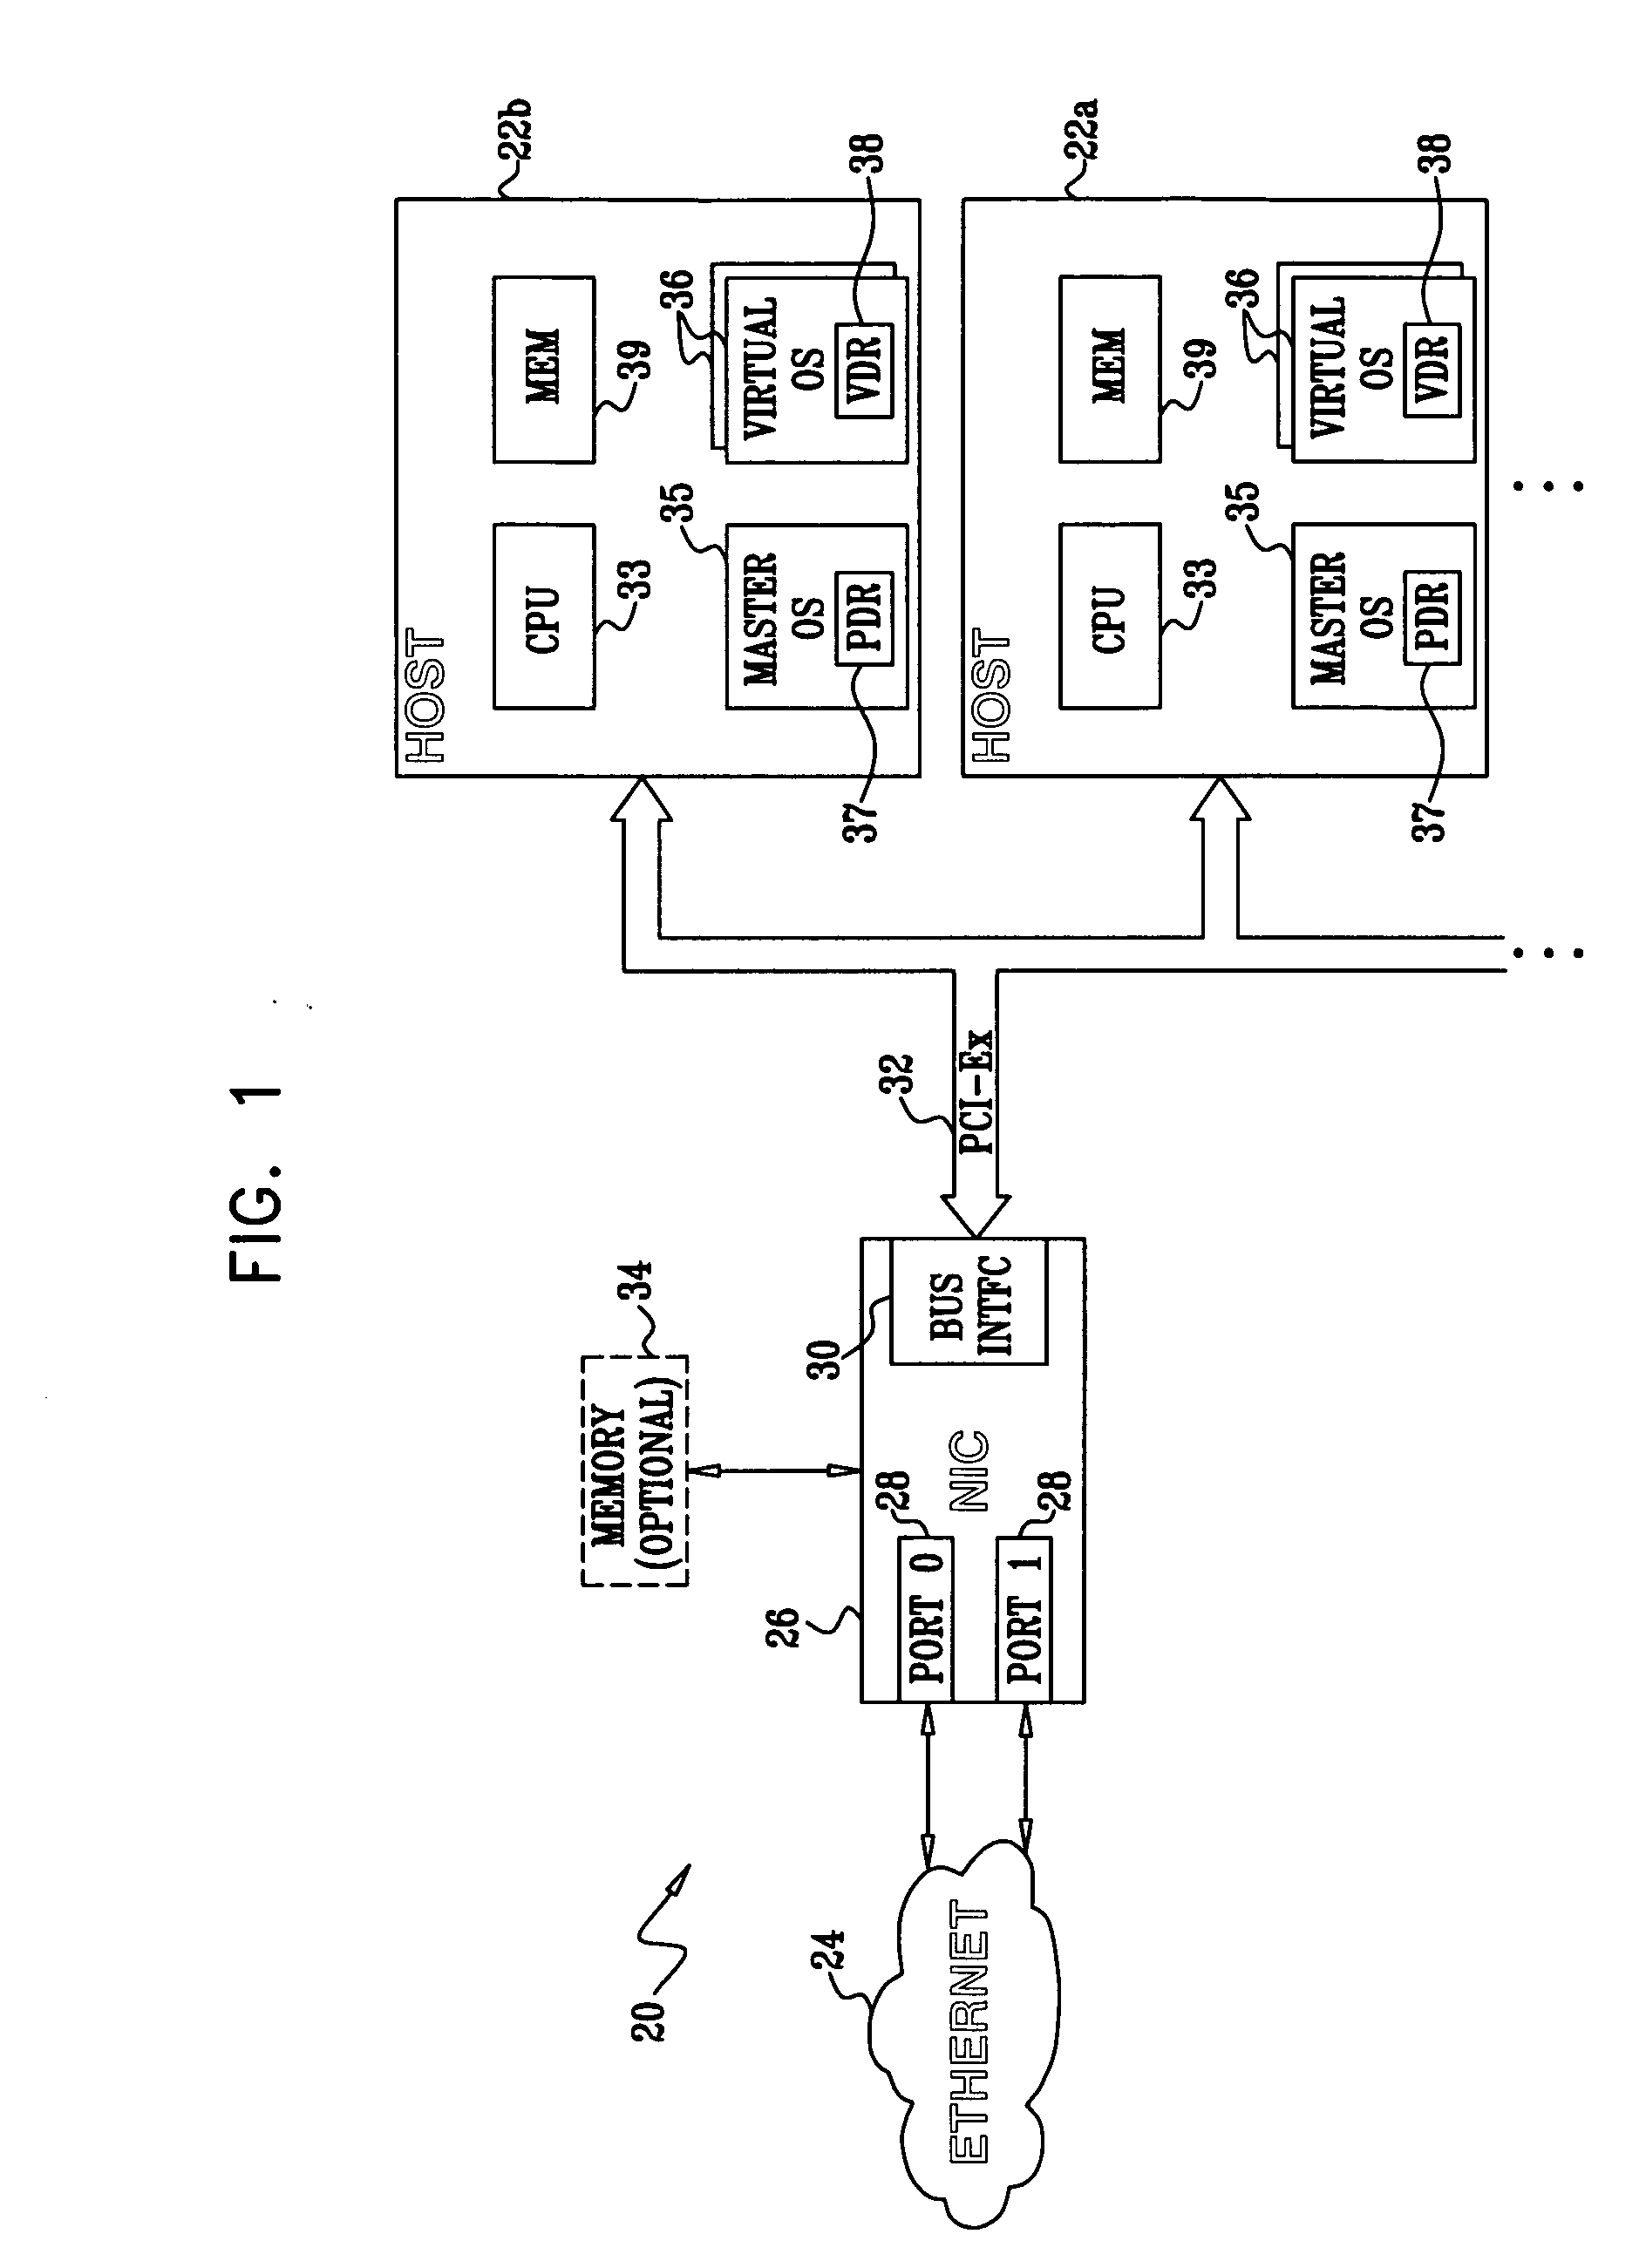 Efficient handling of work requests in a network interface device